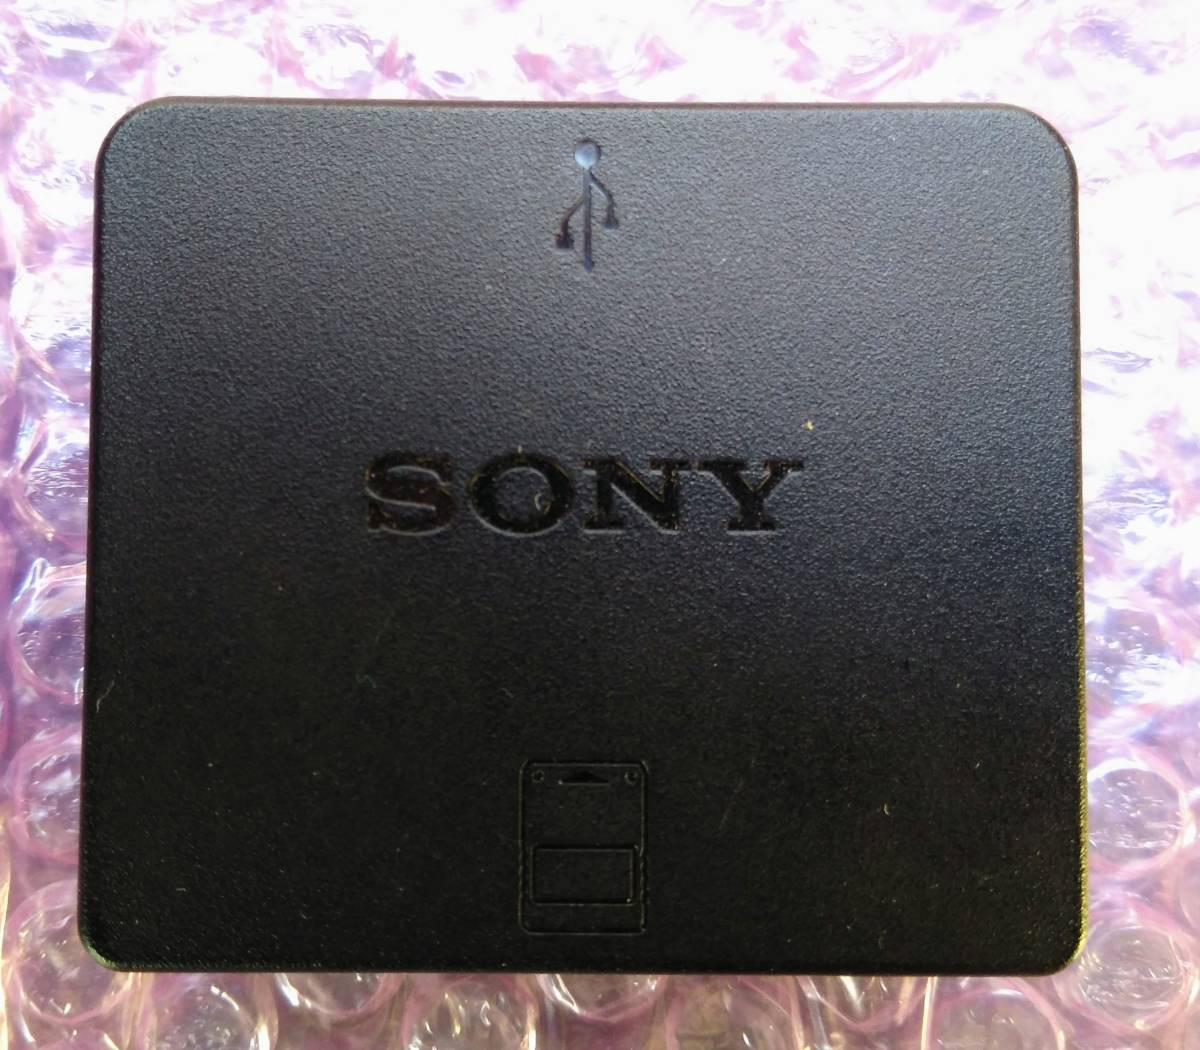 ①*PS2/PS3*SONY memory card adaptor *CECHZM1 operation goods *